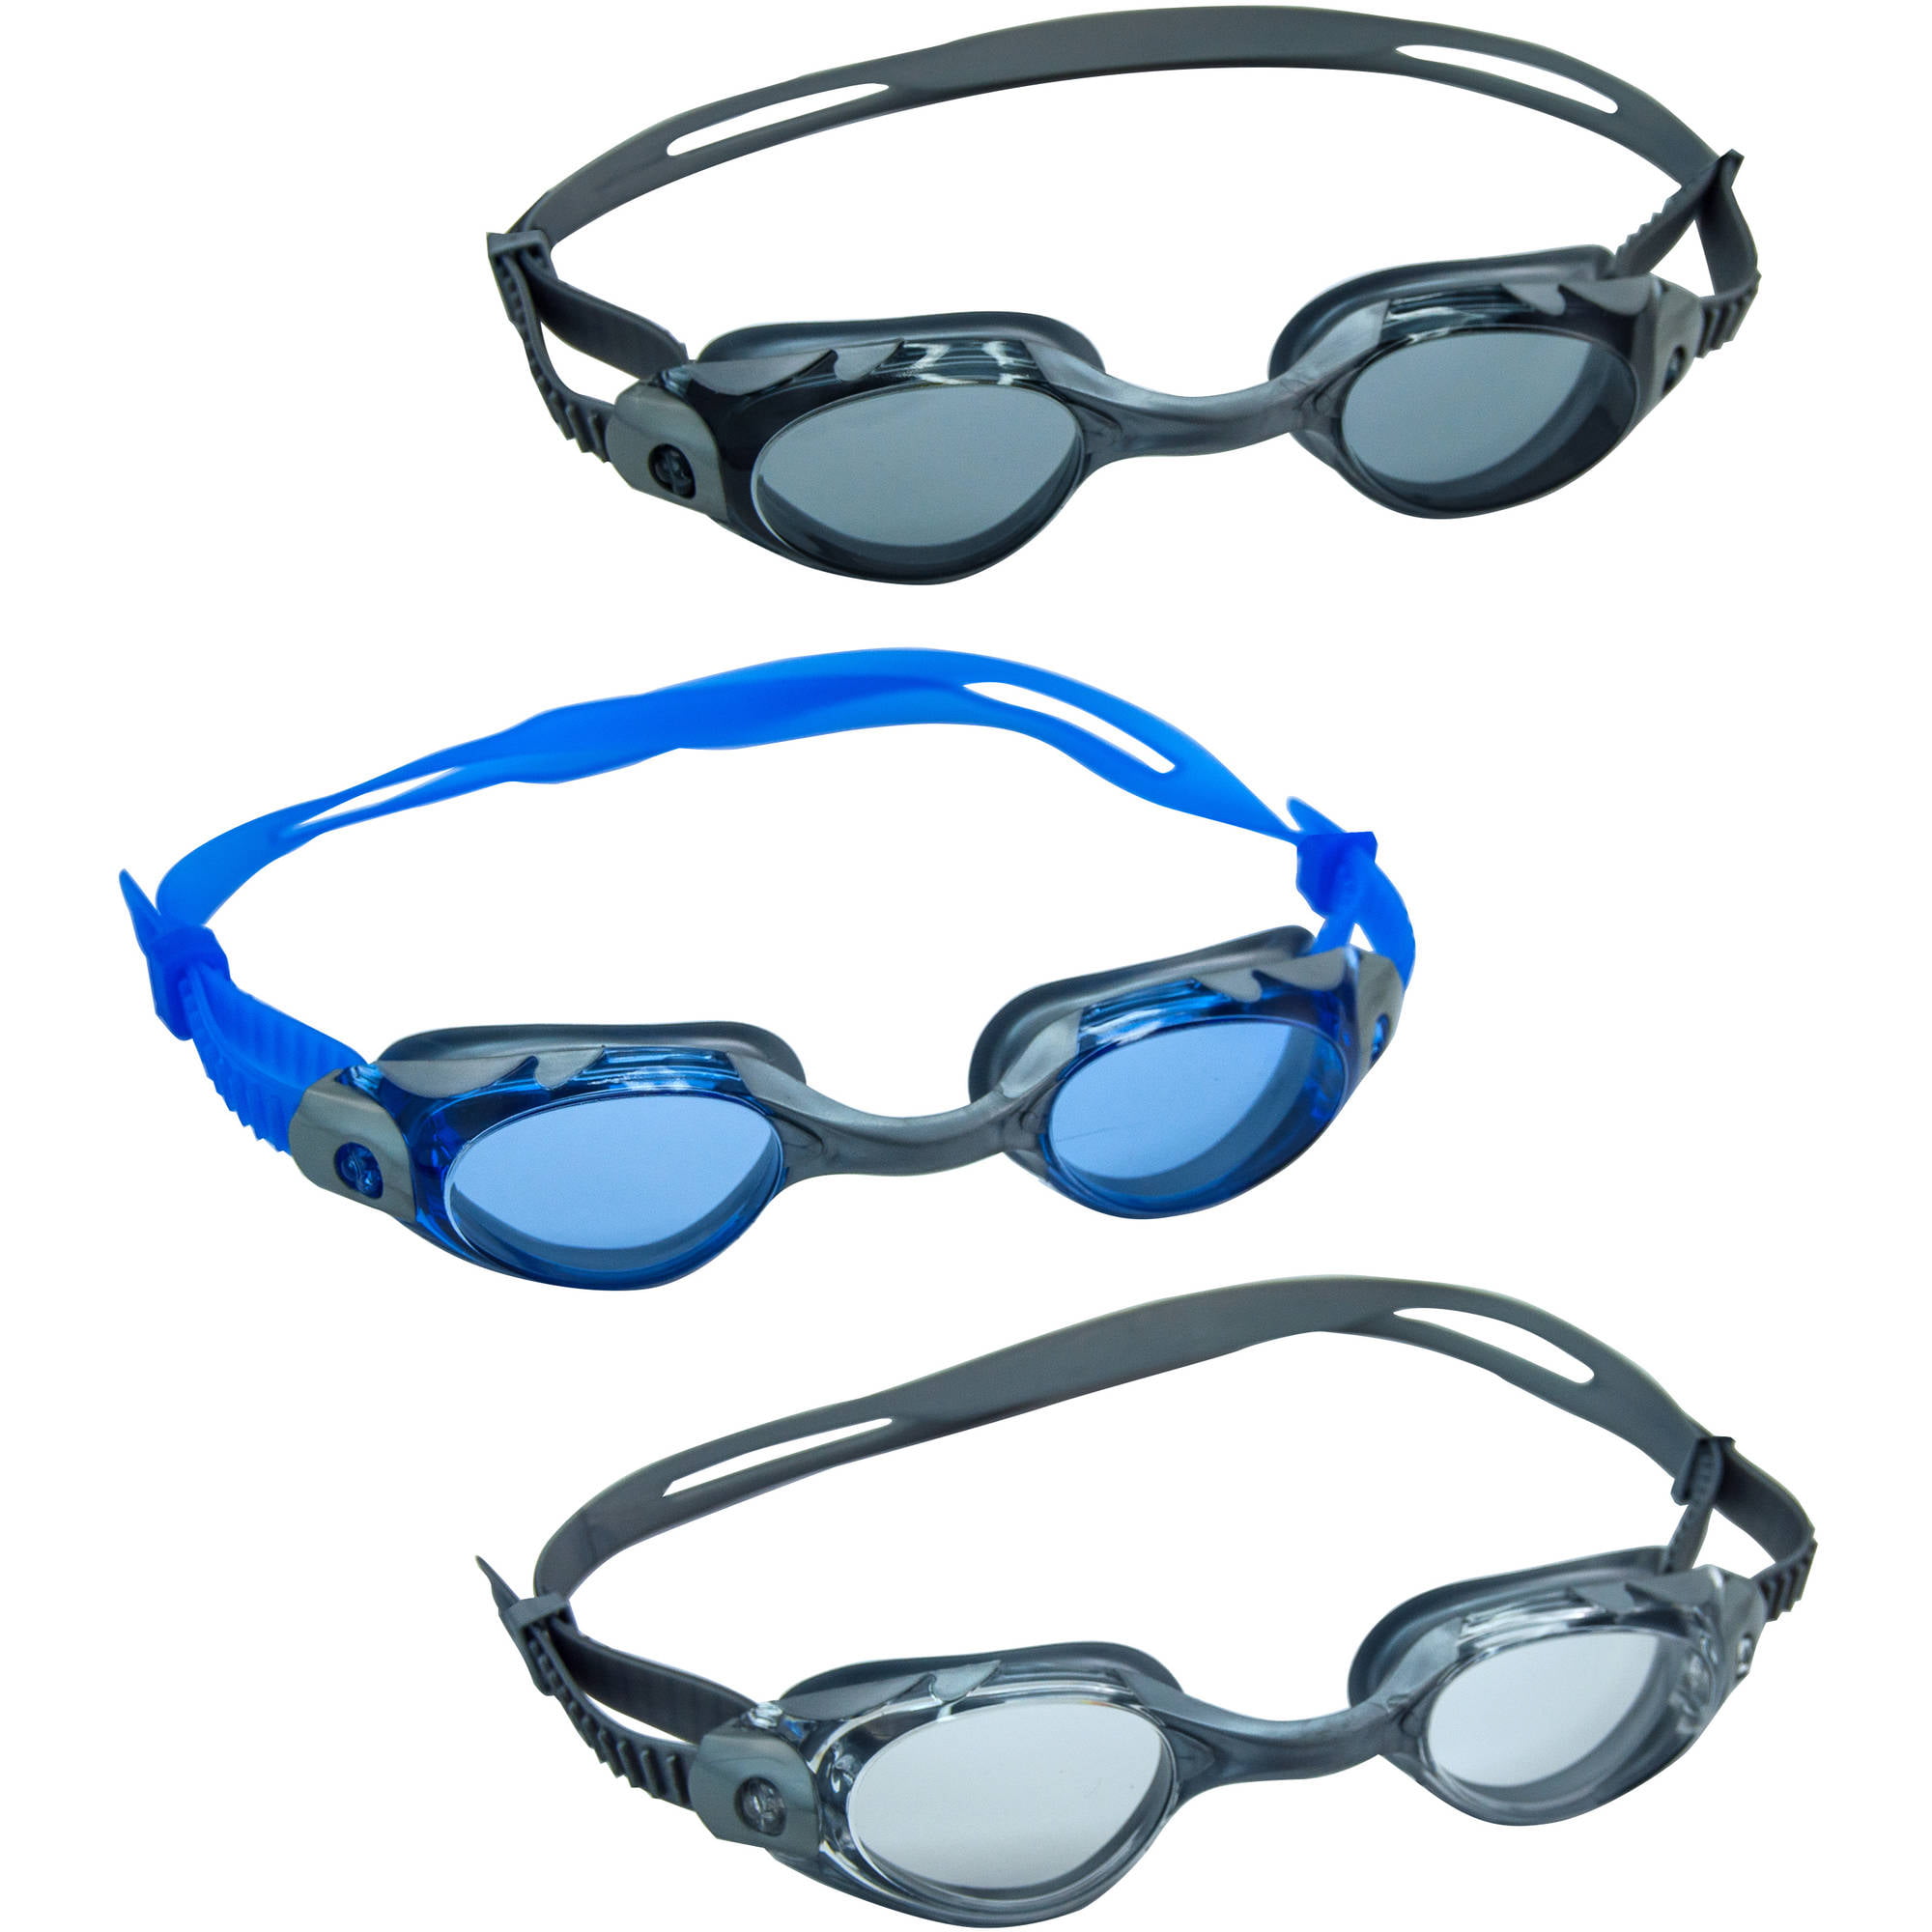 3 Pack Dolfino Adult Pacesetter Swim Goggles blue/gray/clear 